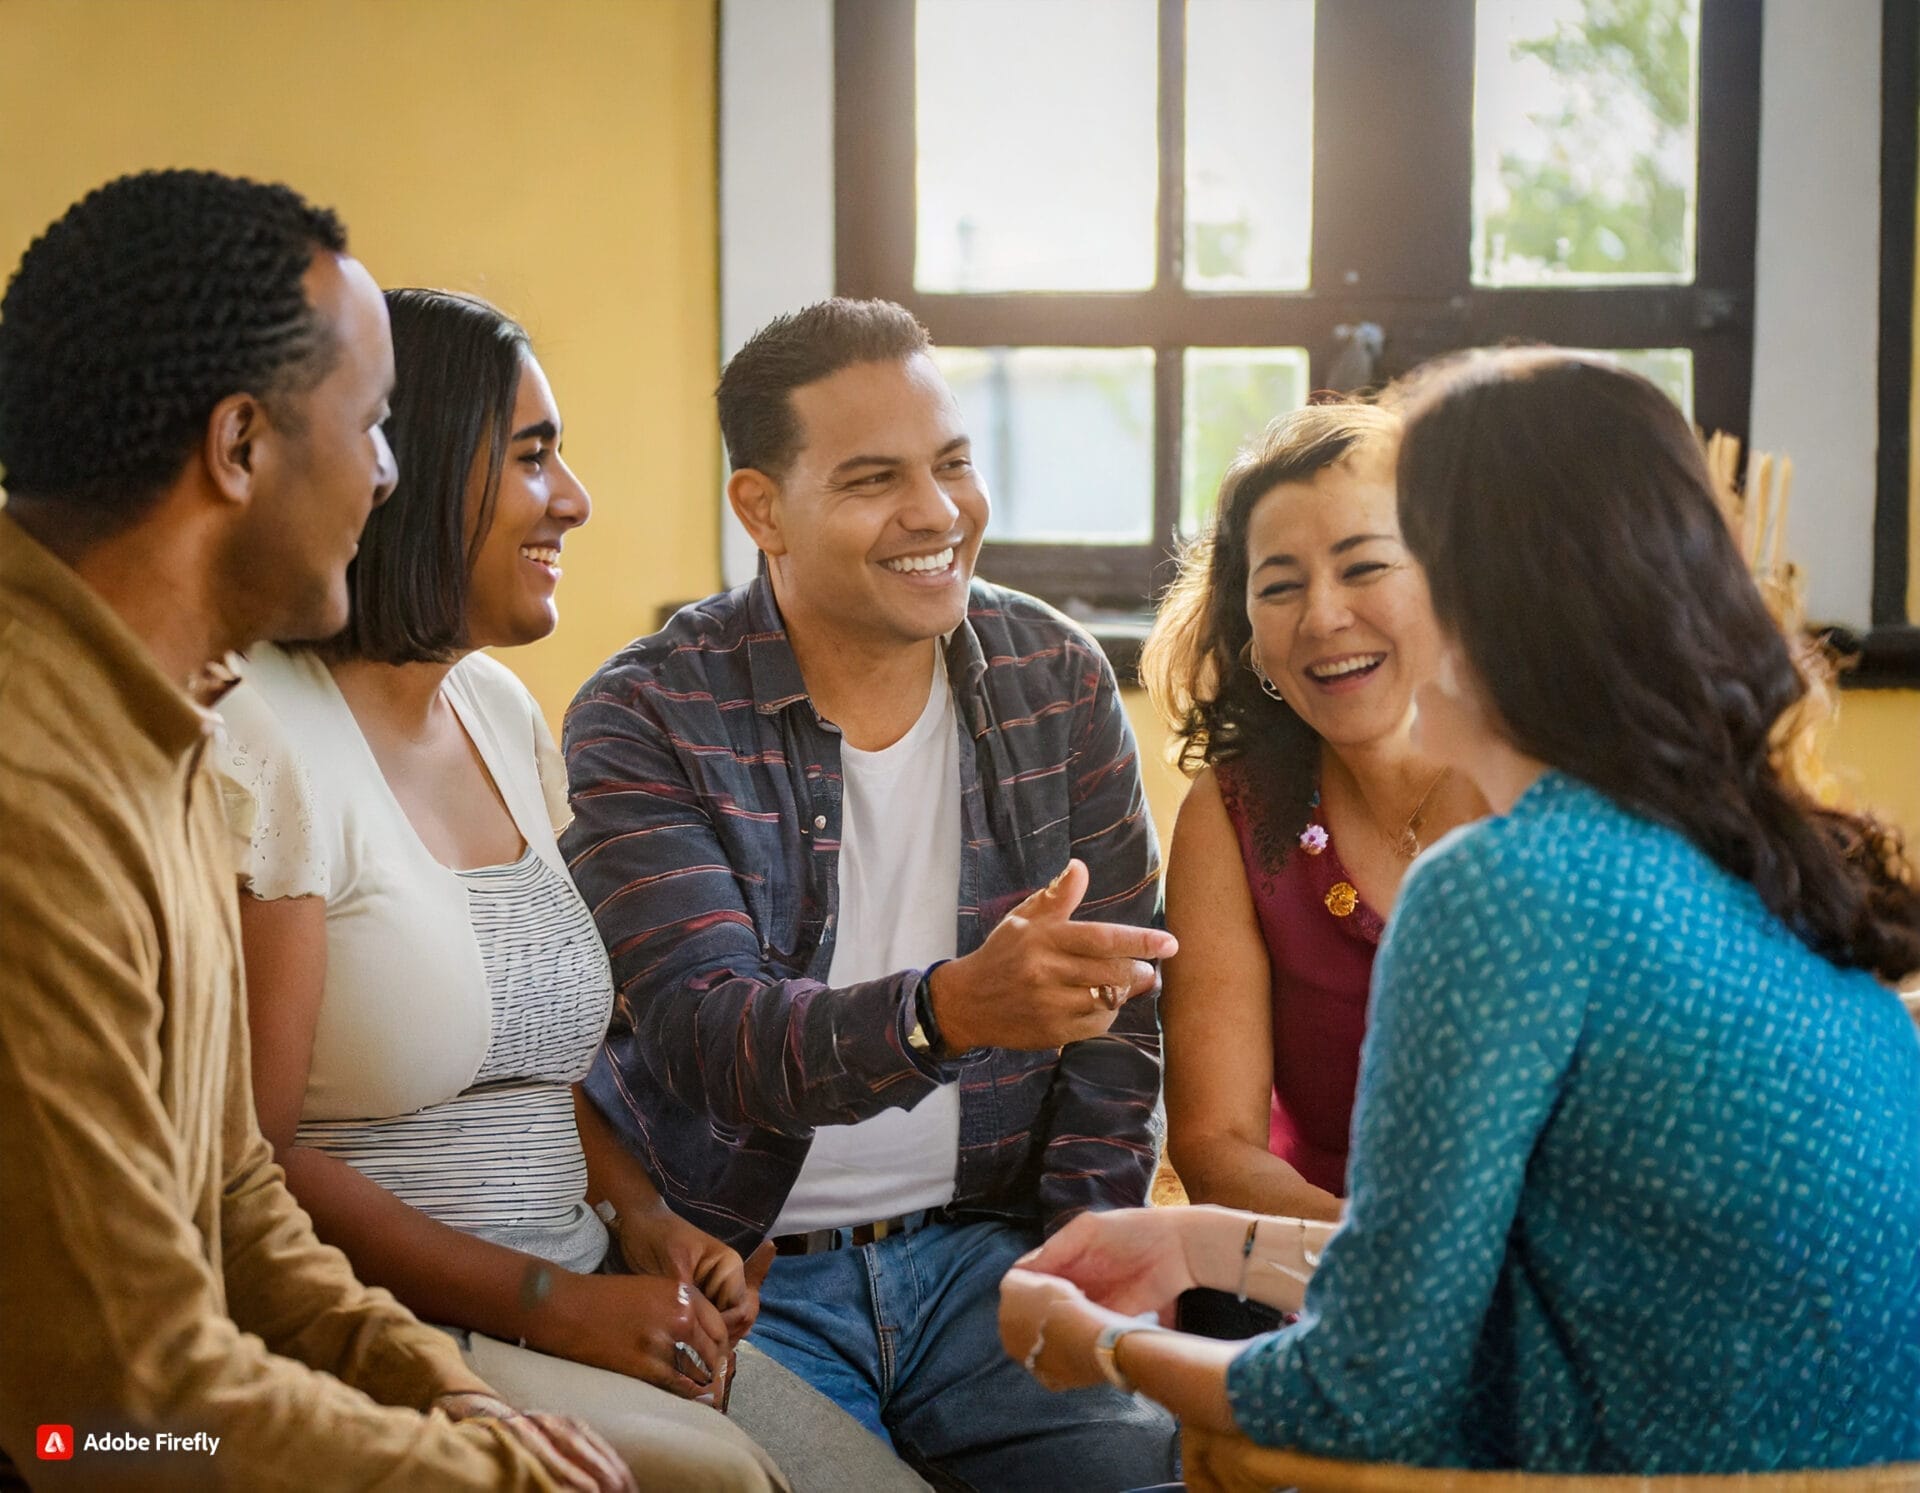 A group of people engaged in a lively small talk conversation at a social event, highlighting the importance of approachability and friendliness. Explore the etiquette for small talk and learn how to foster meaningful connections in social gatherings.